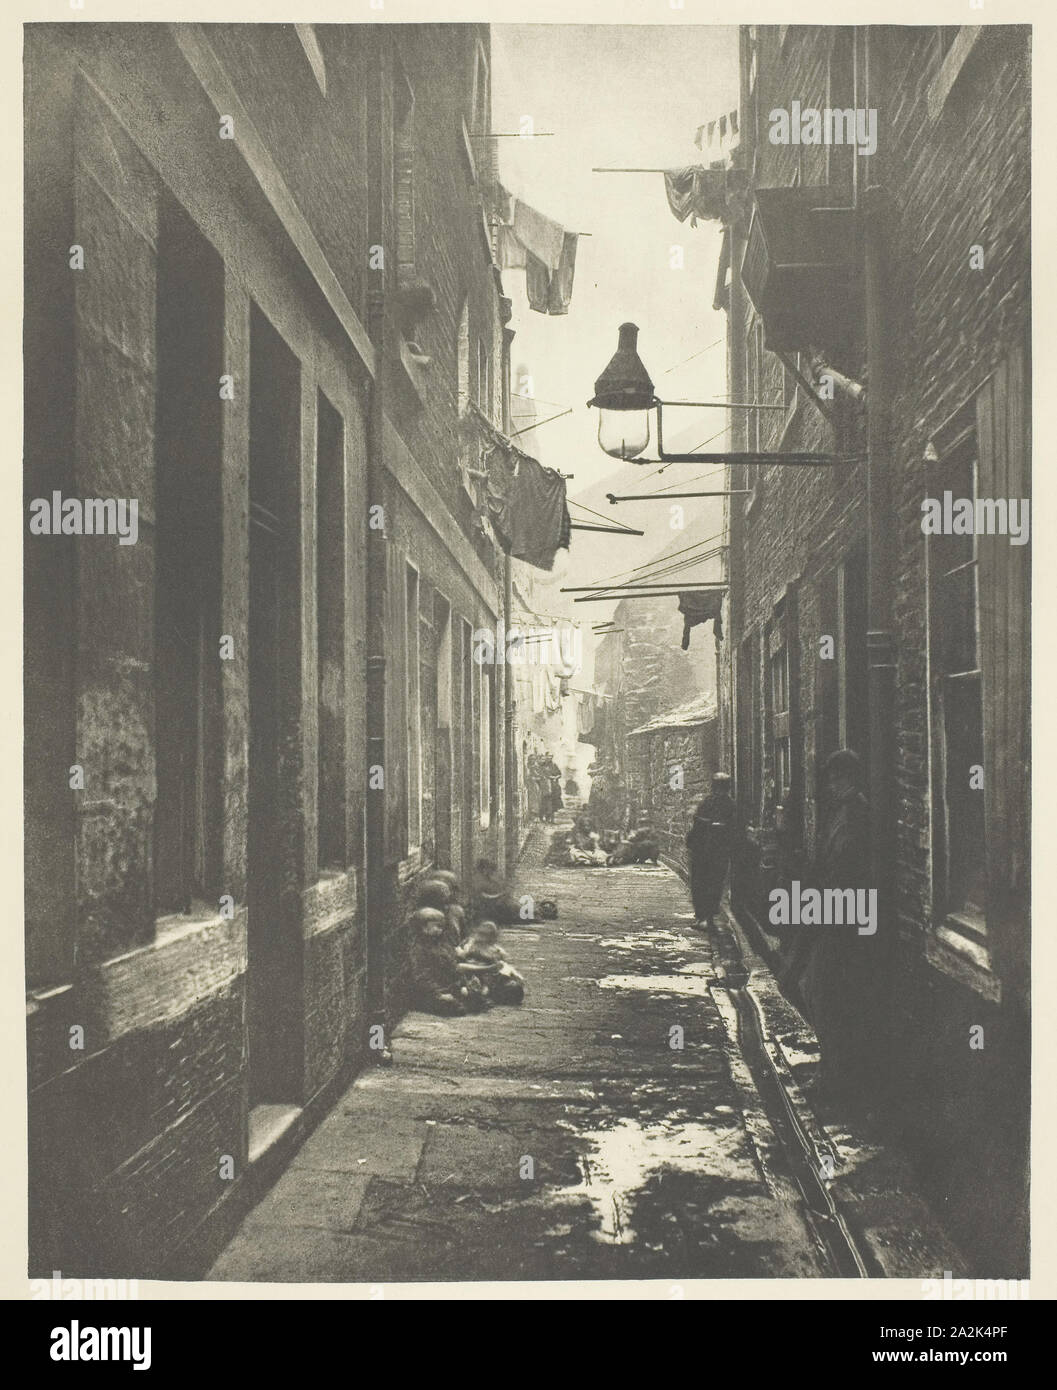 Close No. 80 High Street, 1868, Thomas Annan, Scottish, 1829–1887, Scotland, Photogravure, plate 11 from the book 'The Old Closes & Streets of Glasgow' (1900), 22.4 x 17.9 cm (image), 37.7 x 27.2 cm (paper Stock Photo